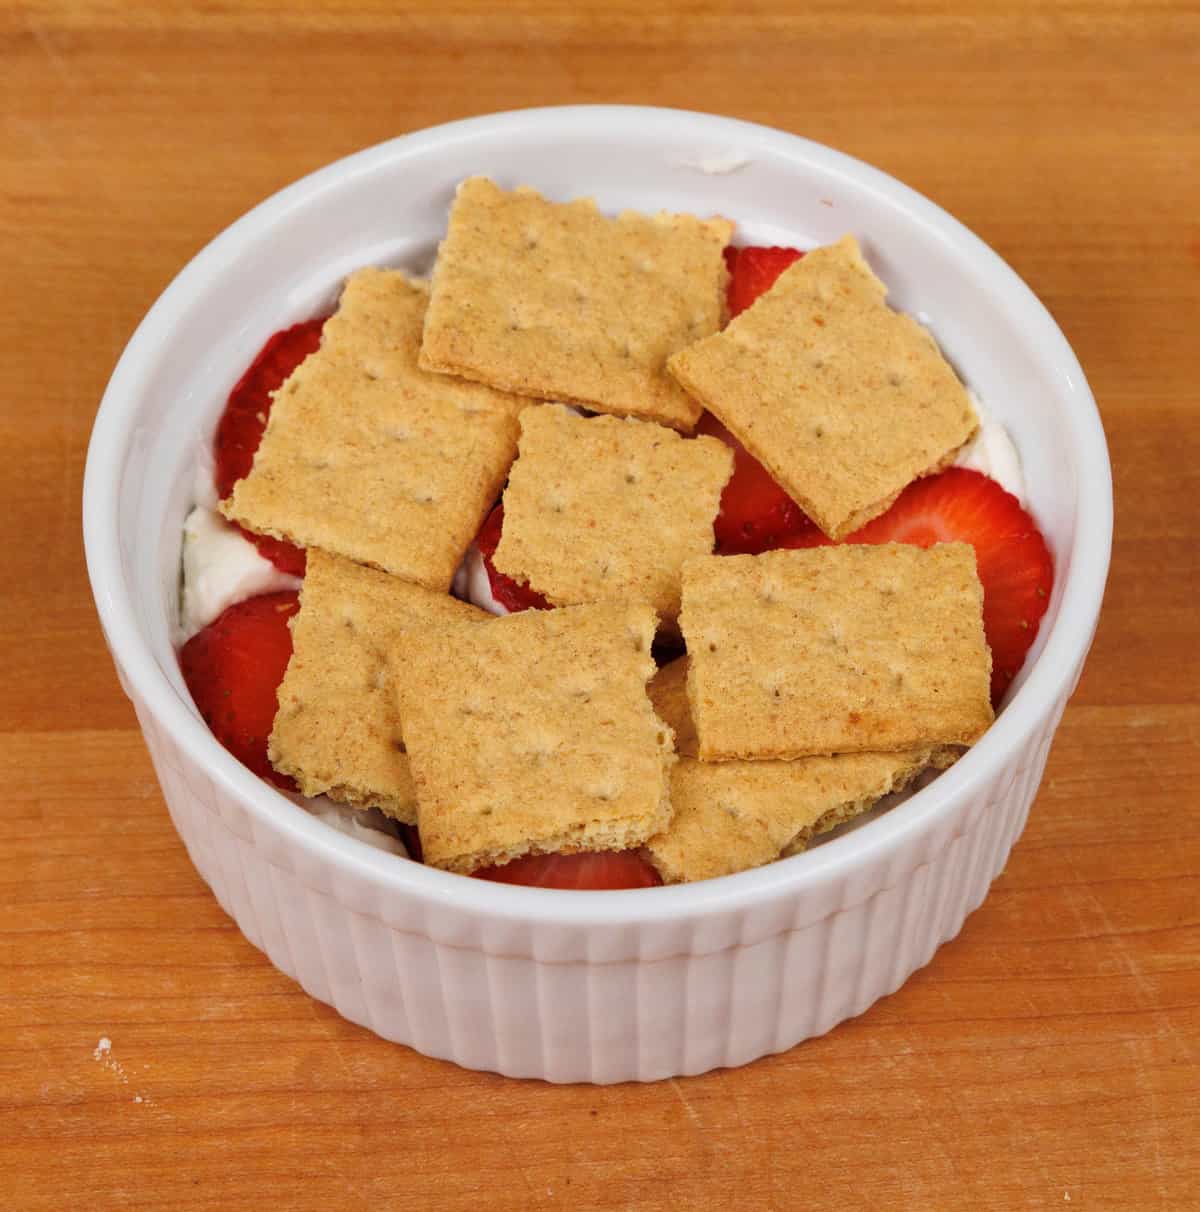 a layer of graham crackers covering strawberries and cream in a small baking dish.